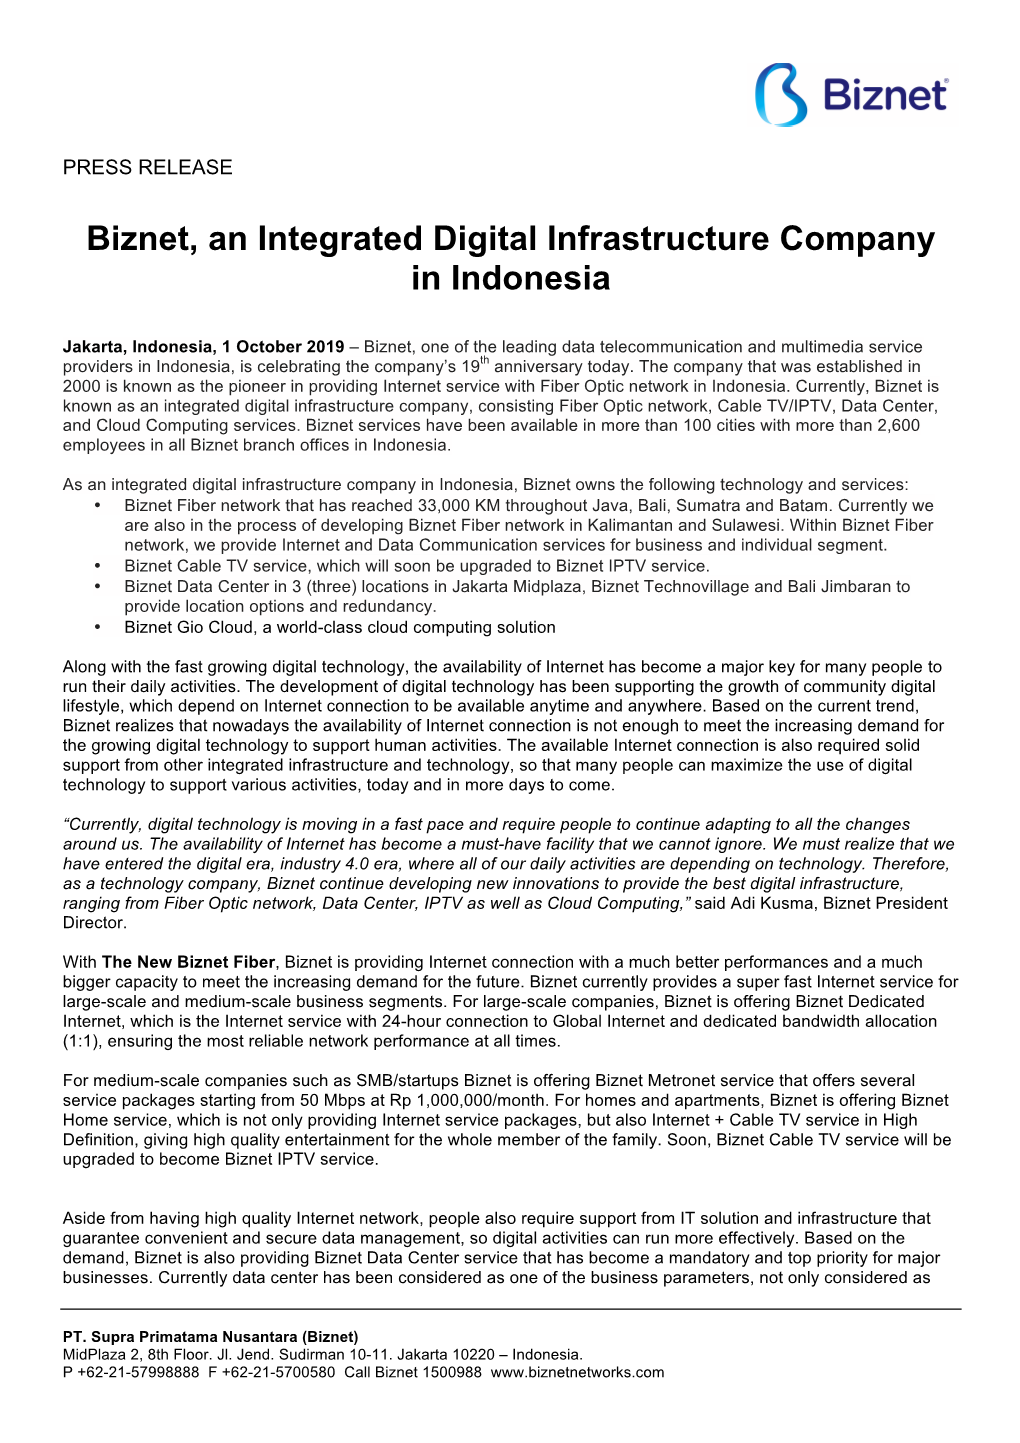 Biznet, an Integrated Digital Infrastructure Company in Indonesia